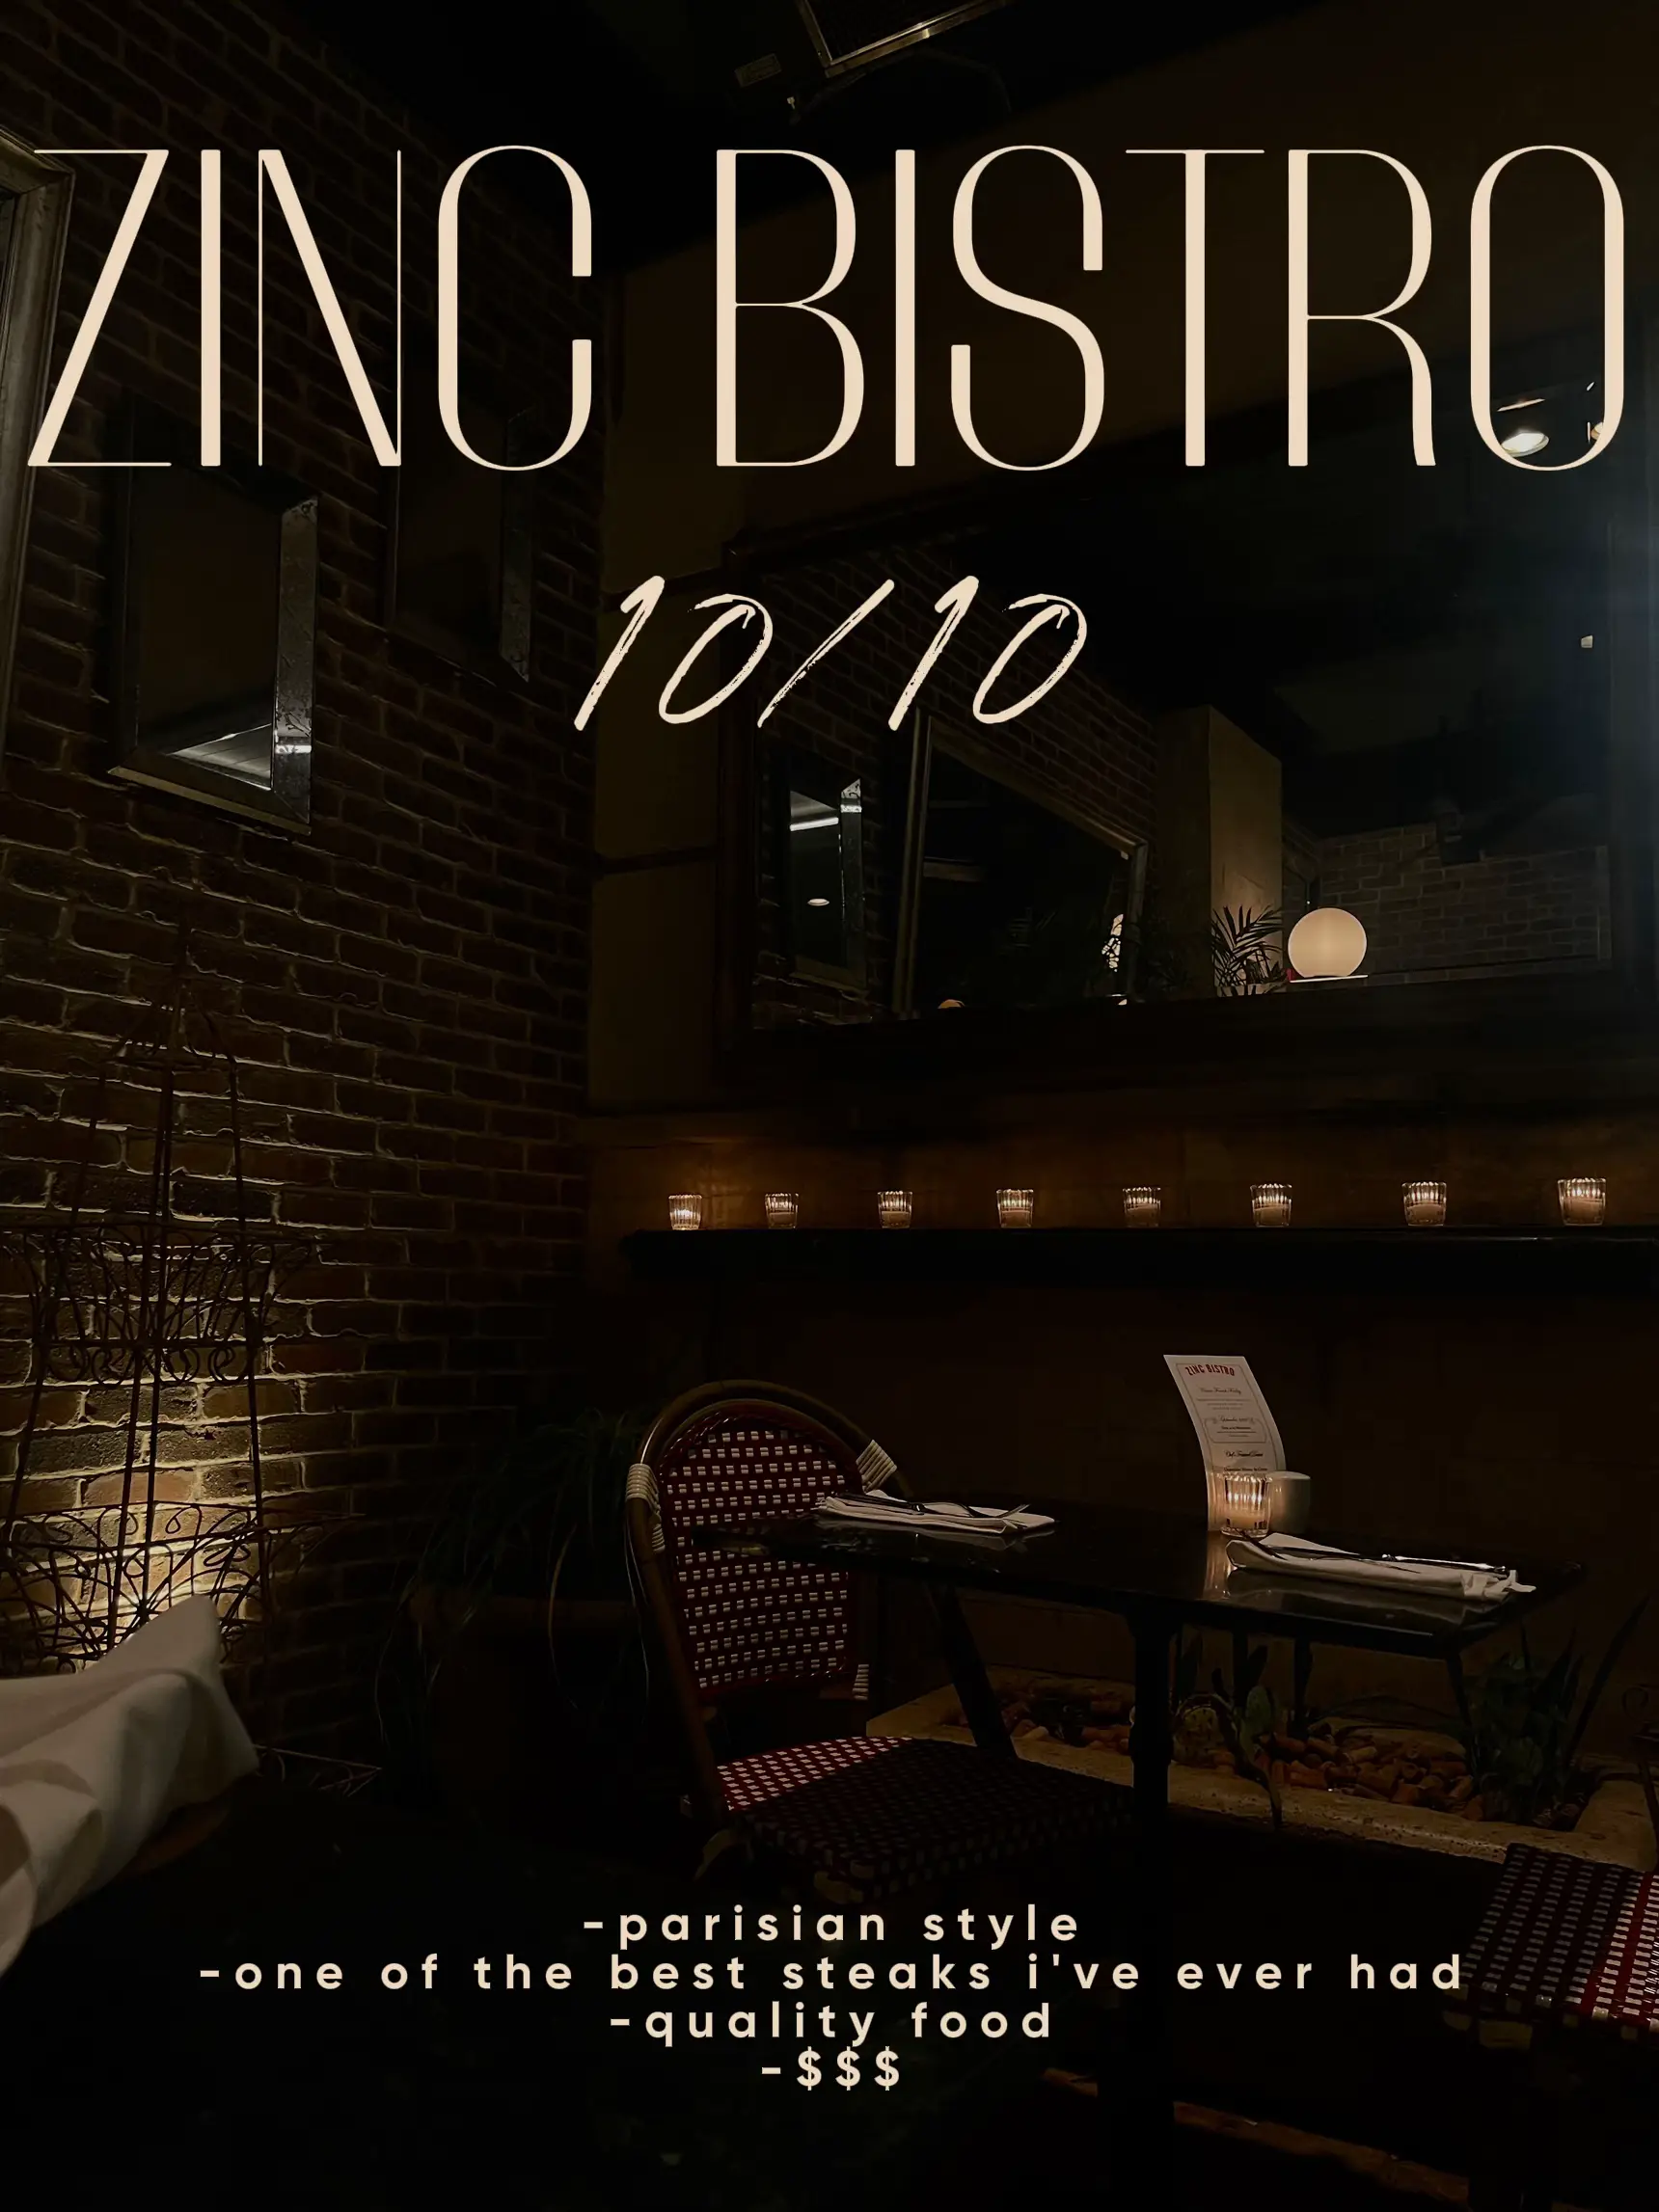  I\C Bistro is a restaurant that specializes in French cuisine. They offer a variety of dishes, including steaks and